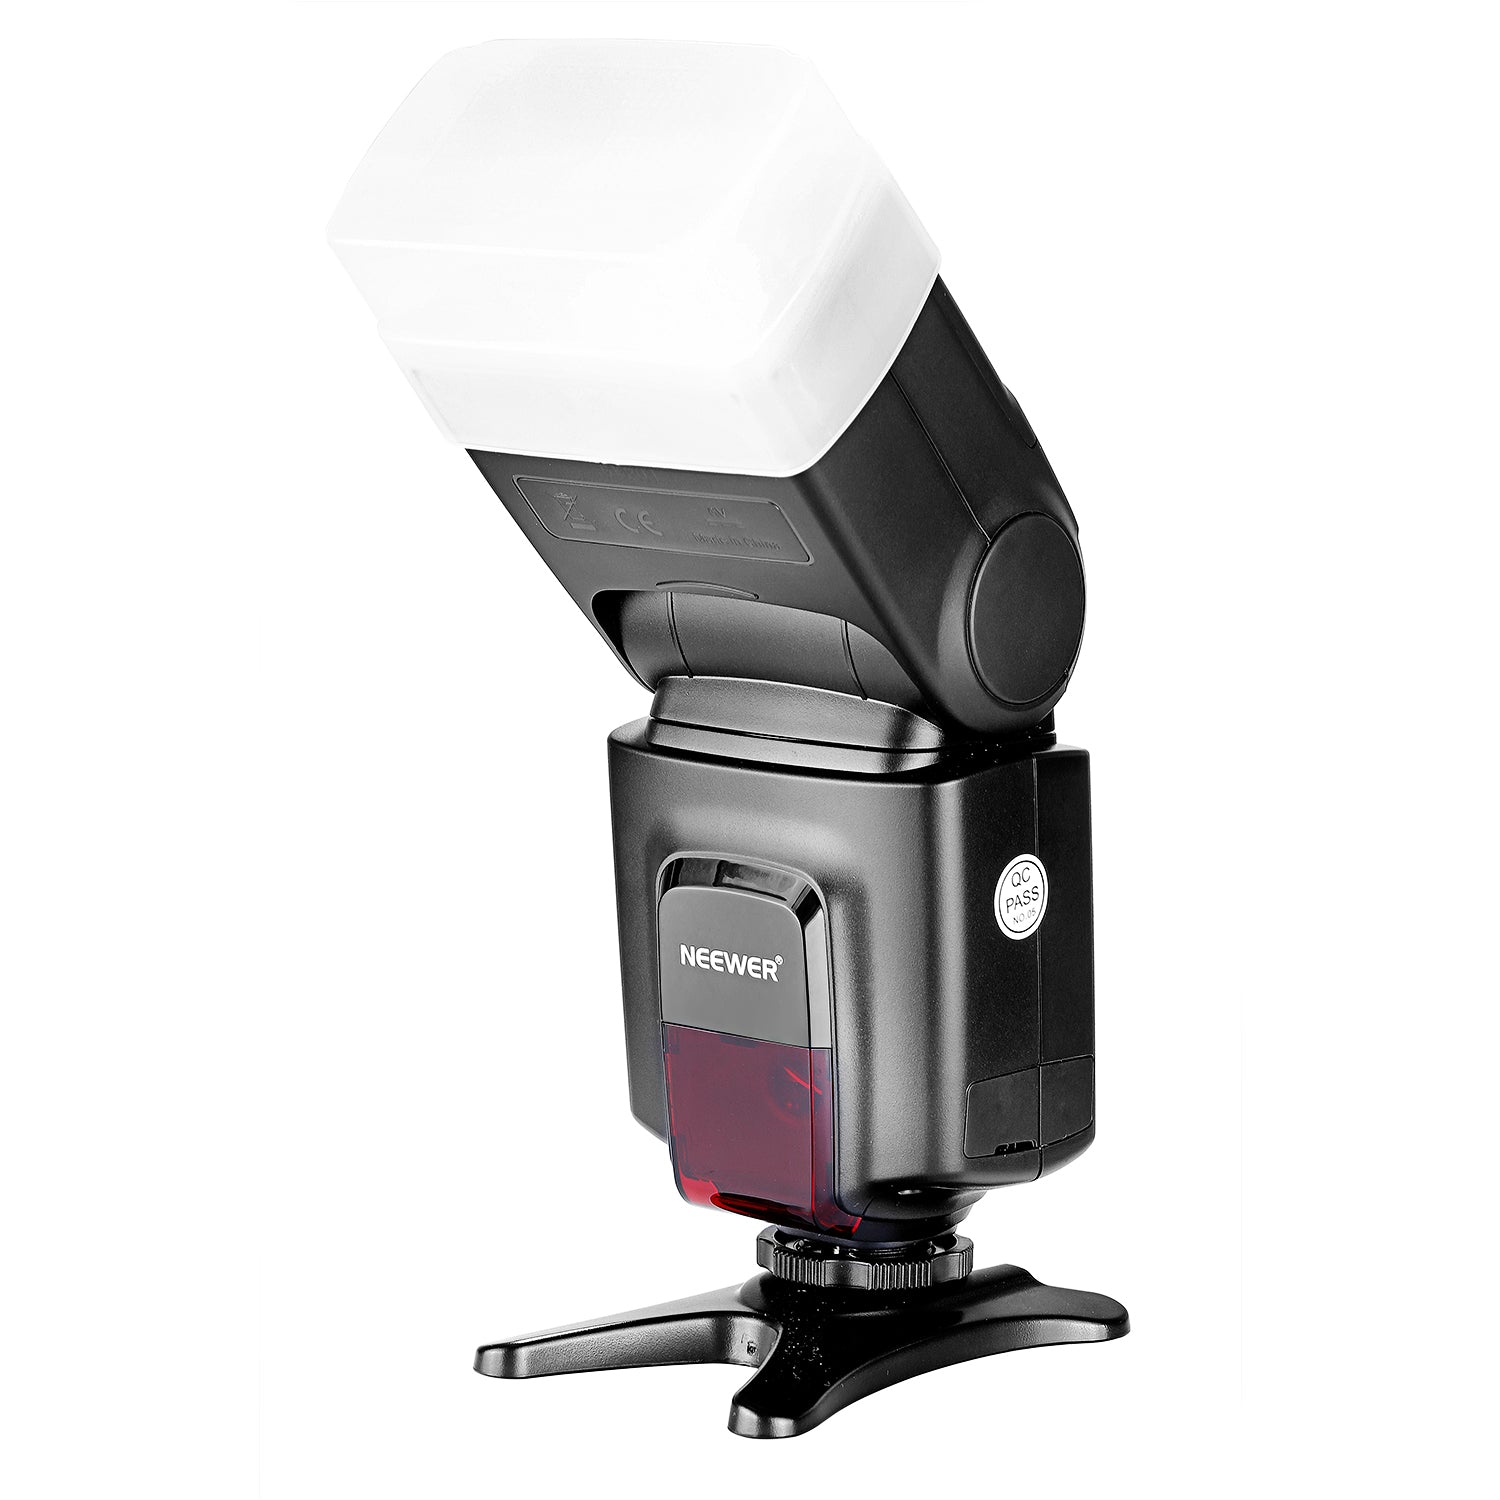 NEEWER TT560 Speedlite Flash With Filters And Remote Control - NEEWER